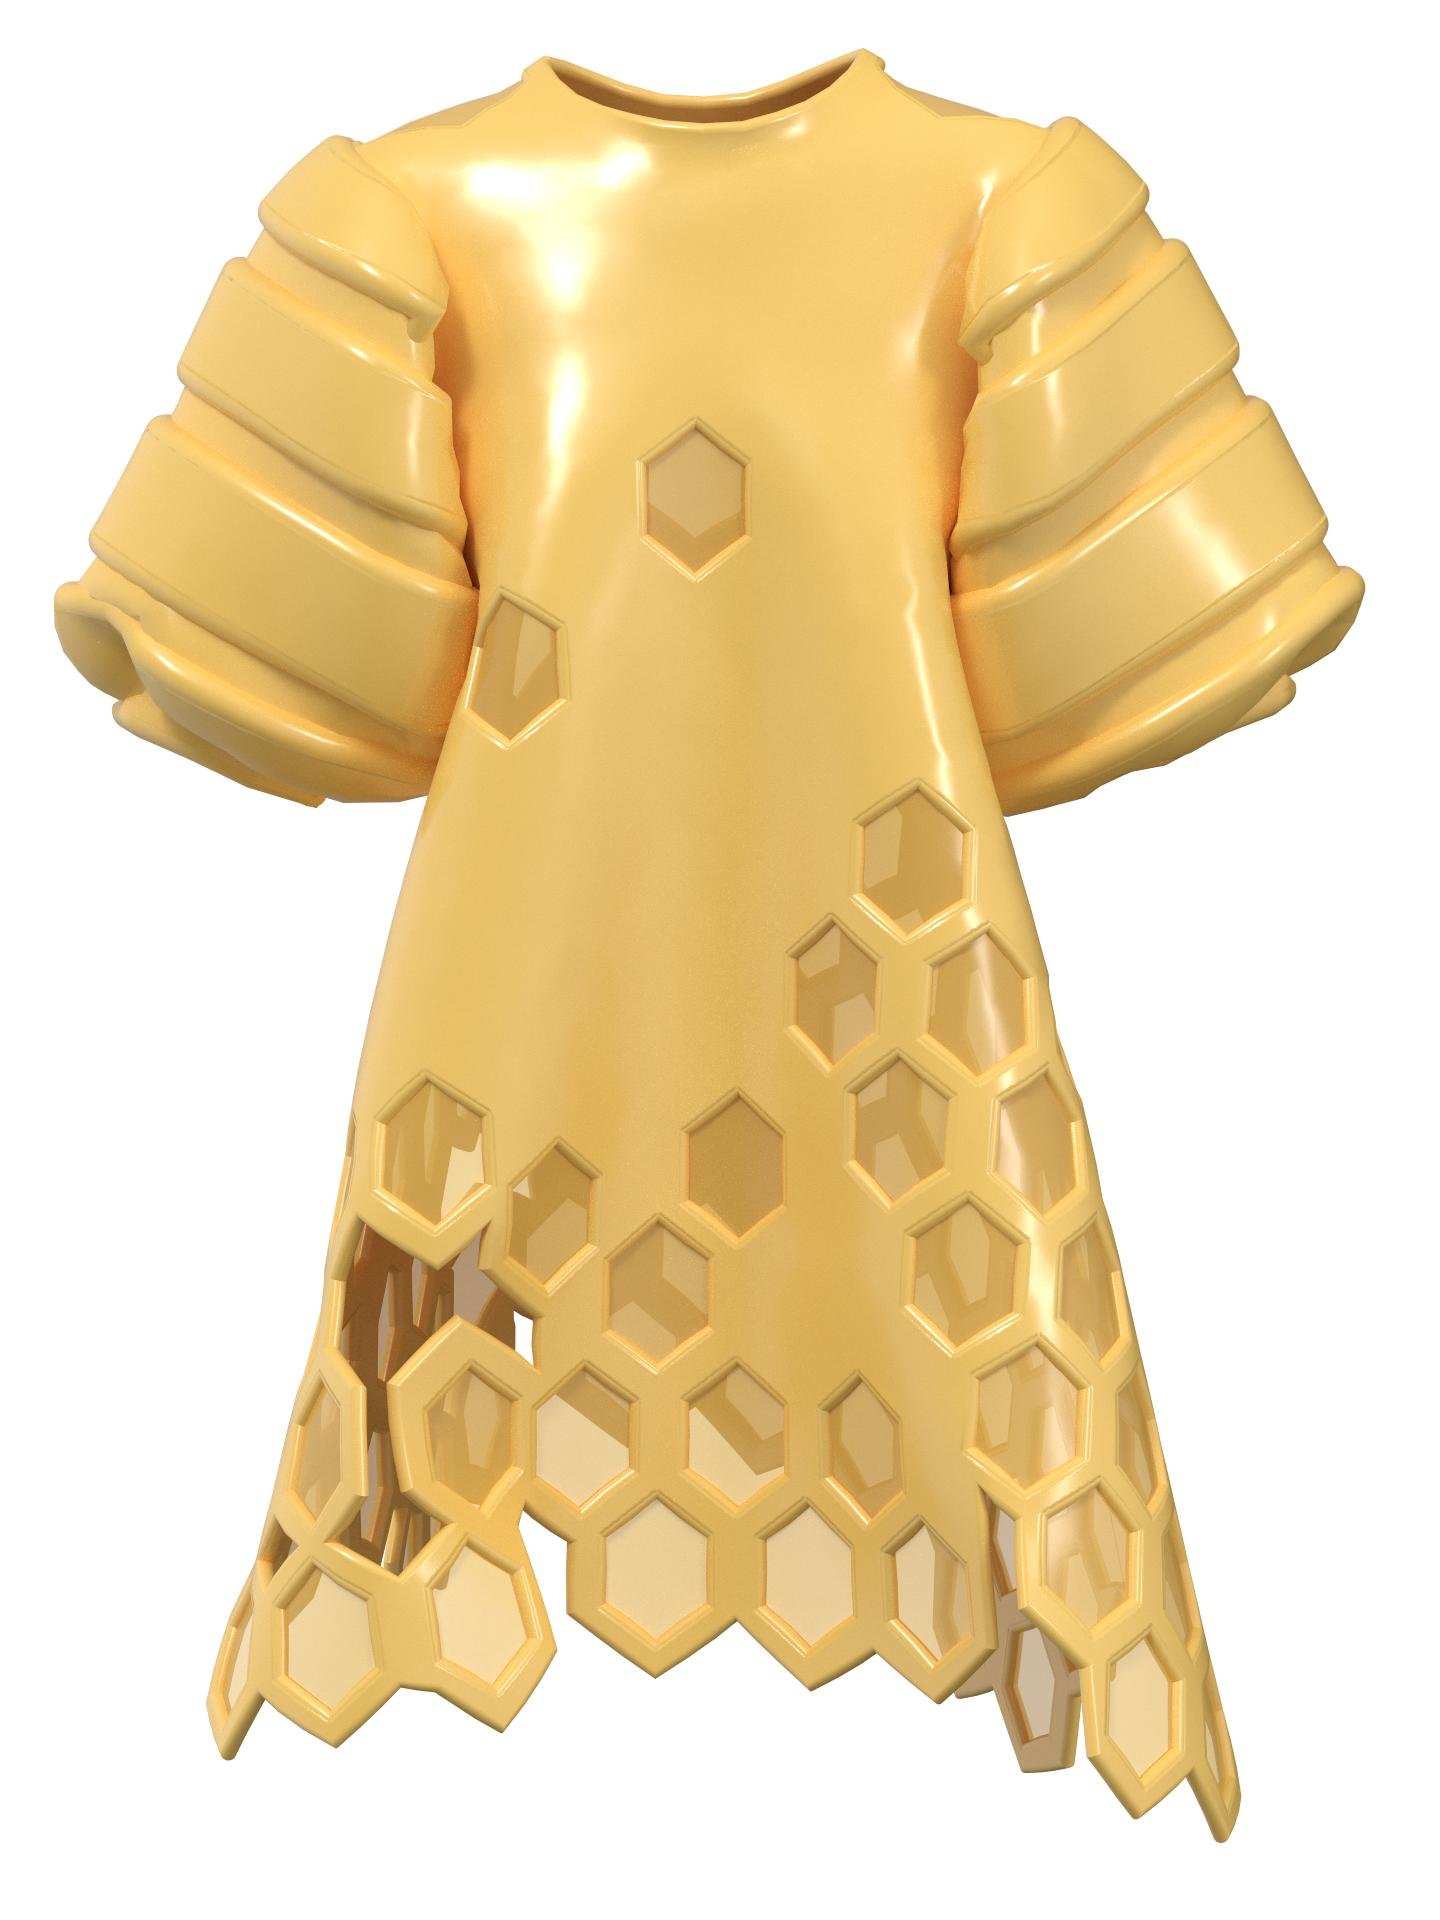 Honeycomb dress by CIRCUS LAB BY JULIE CIRCUS